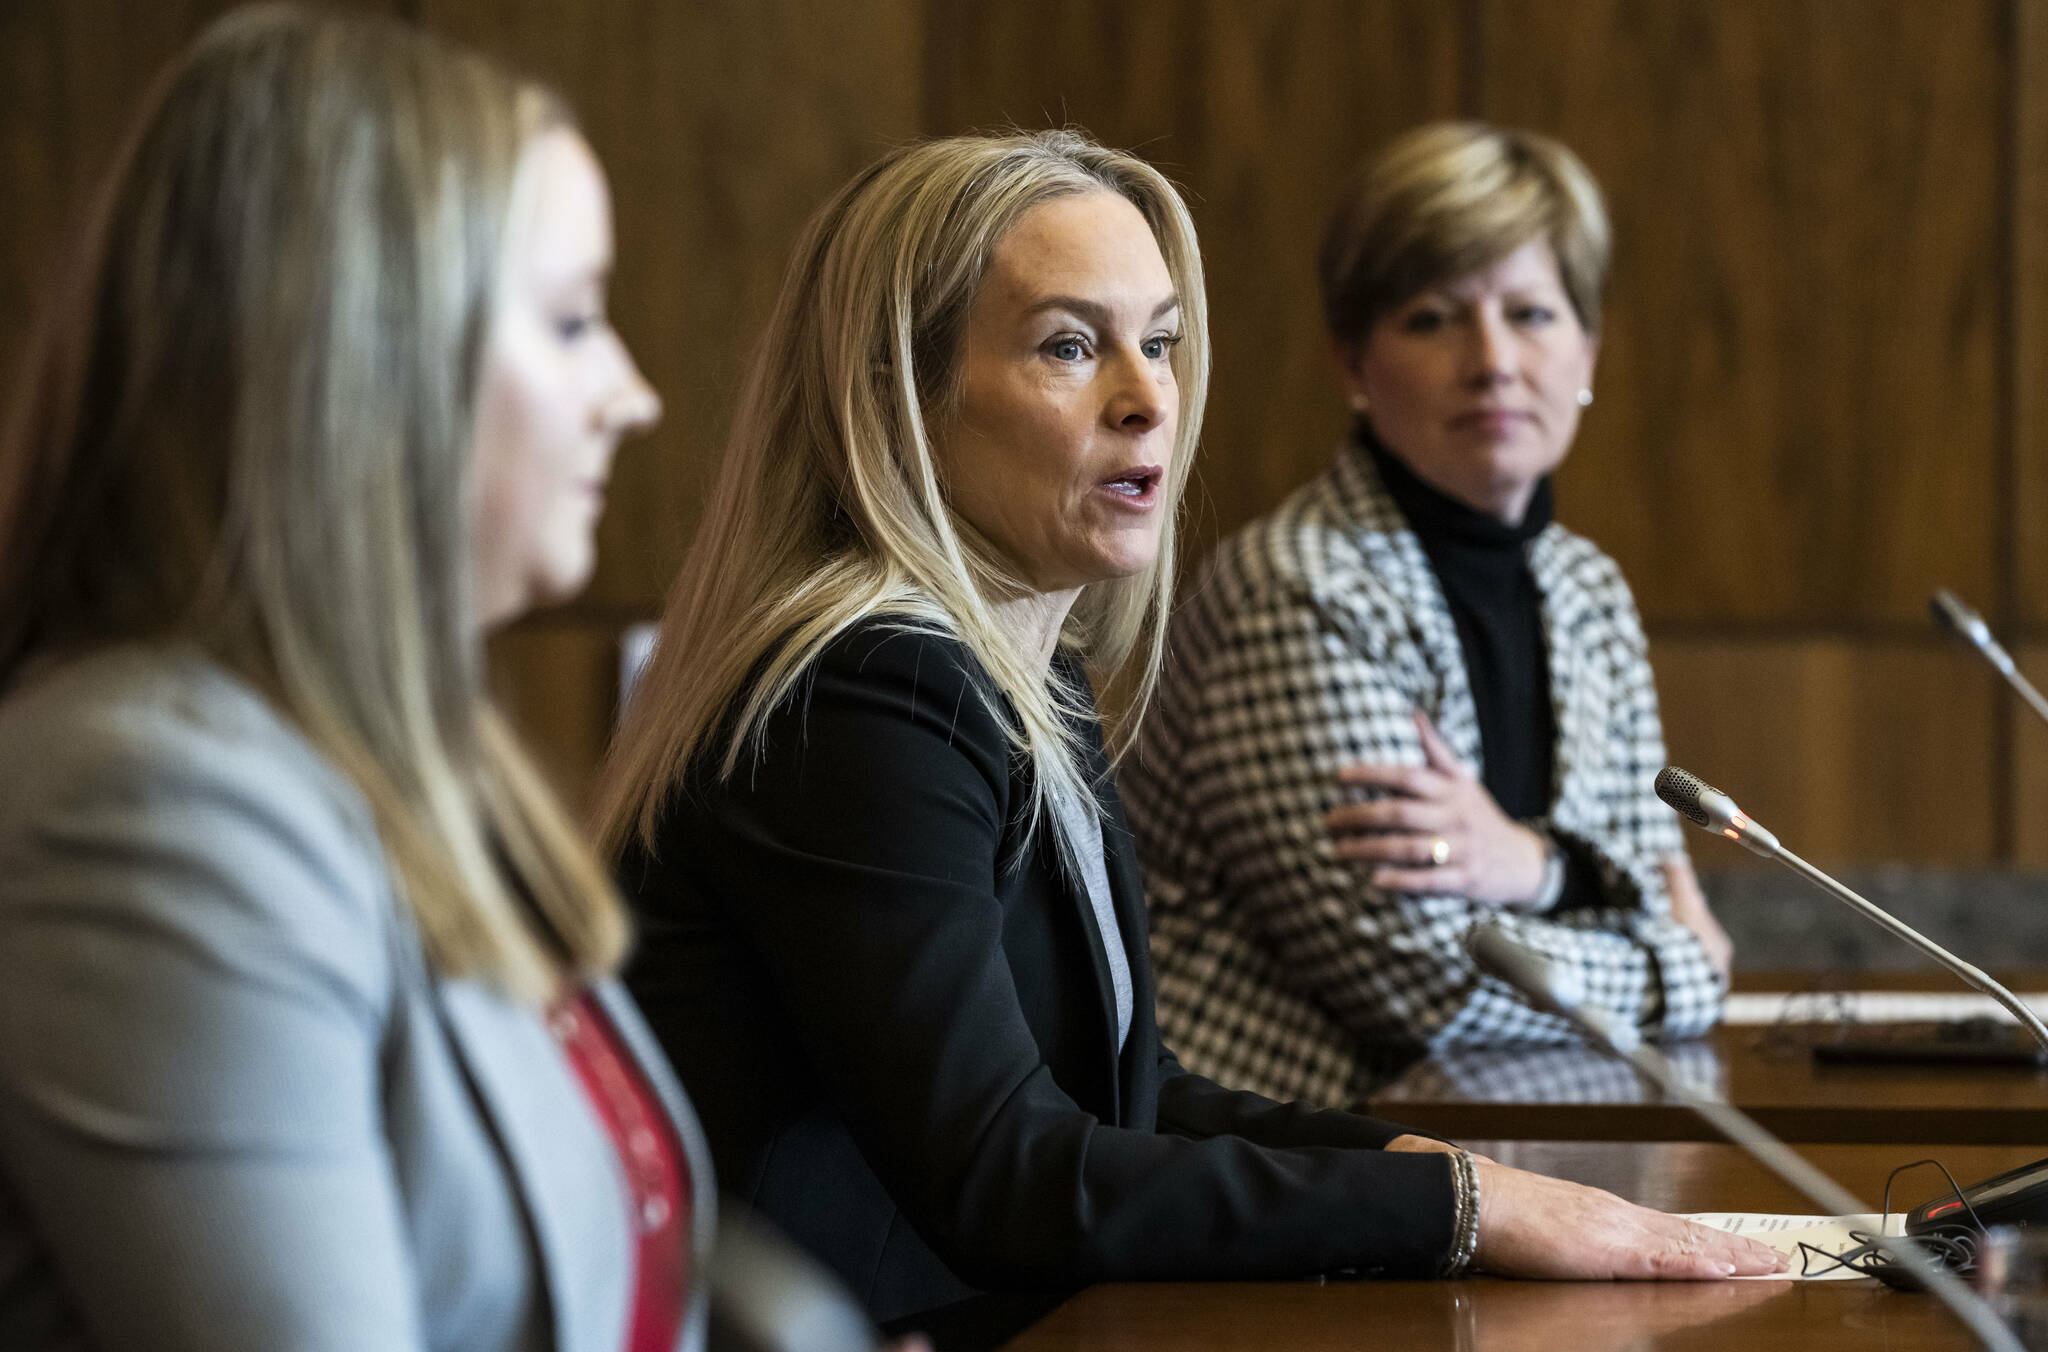 Kim Shore, co-founder of Gymnasts Gymnasts for Change Canada, centre, participates in a news conference on sexual misconduct allegations at Gymnastics Canada along with Conservative Karen Vecchio, right, in Ottawa, on Tuesday, Nov. 22, 2022. THE CANADIAN PRESS/Justin Tang